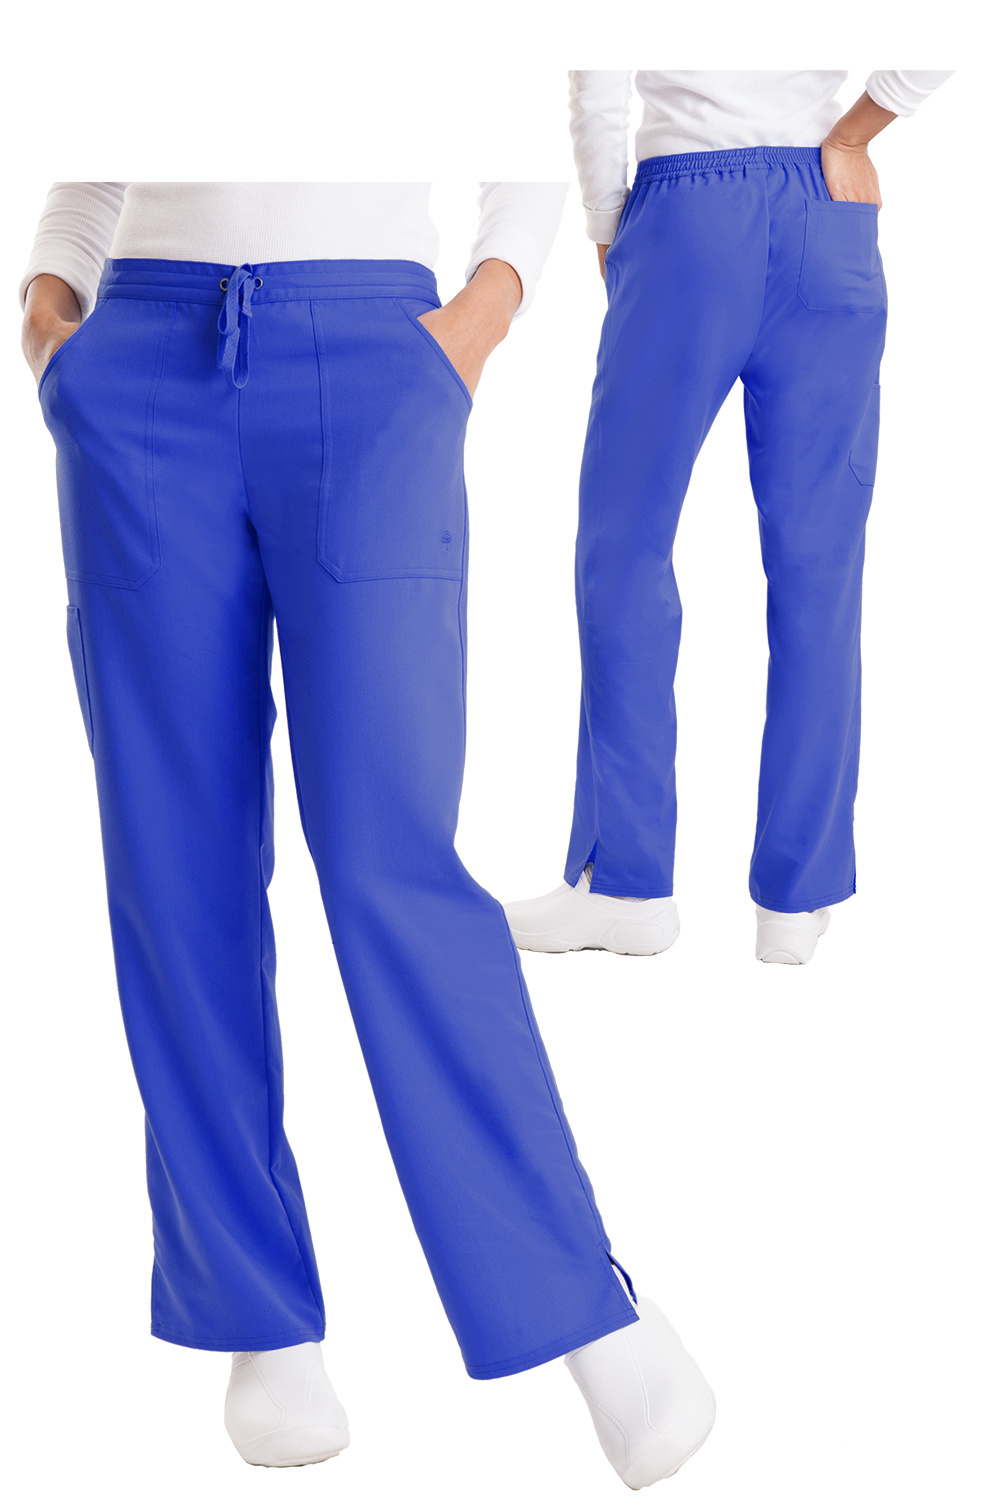 Healing Hands Women's Purple Label Tiffany Pant 9121 - CSE Mobility and ...